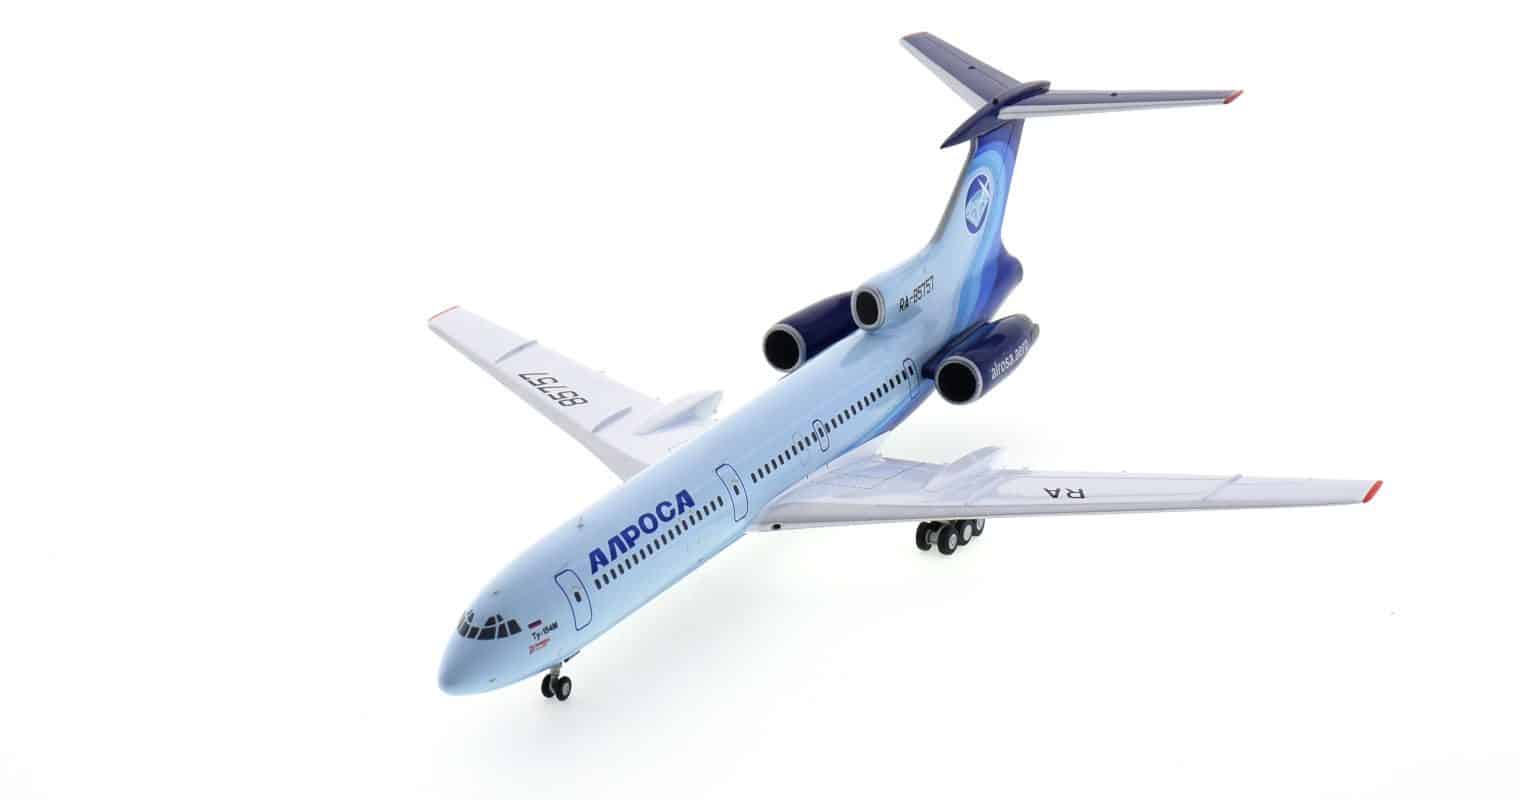 Front port side view of Herpa HE571388 - 1/200 scale diecast model of the Tupolev Tu-154M registration RA-85757 in Air Company ALROSA livery, October 2020. This aircraft operated the last commercial flight in Russia of the Tu-154.